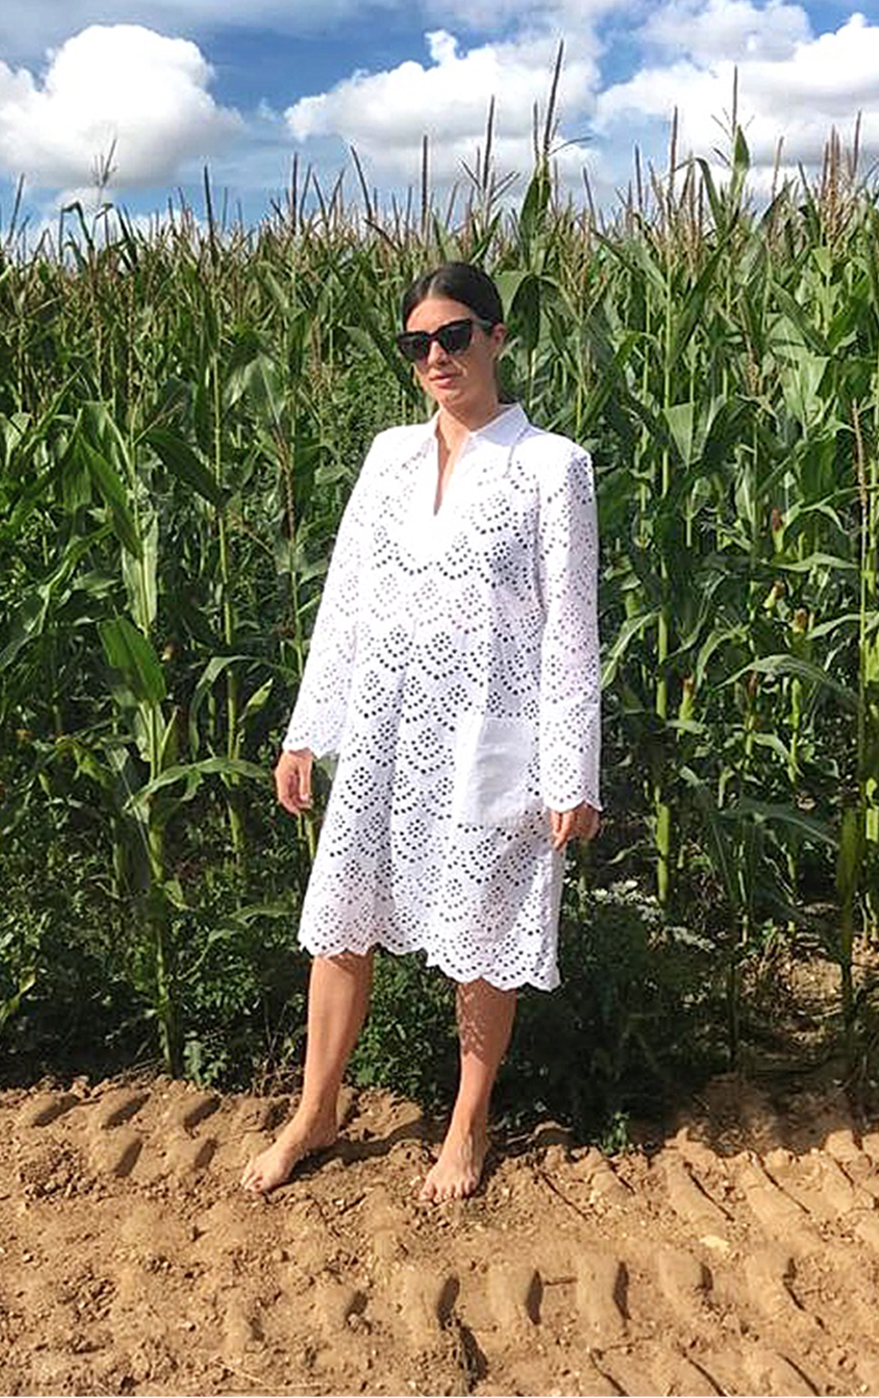 Maddy Moxham, Brand Stylist at Hobbs stands in front of a wheat field barefoot wearing a white shirt dress and sunglasses.